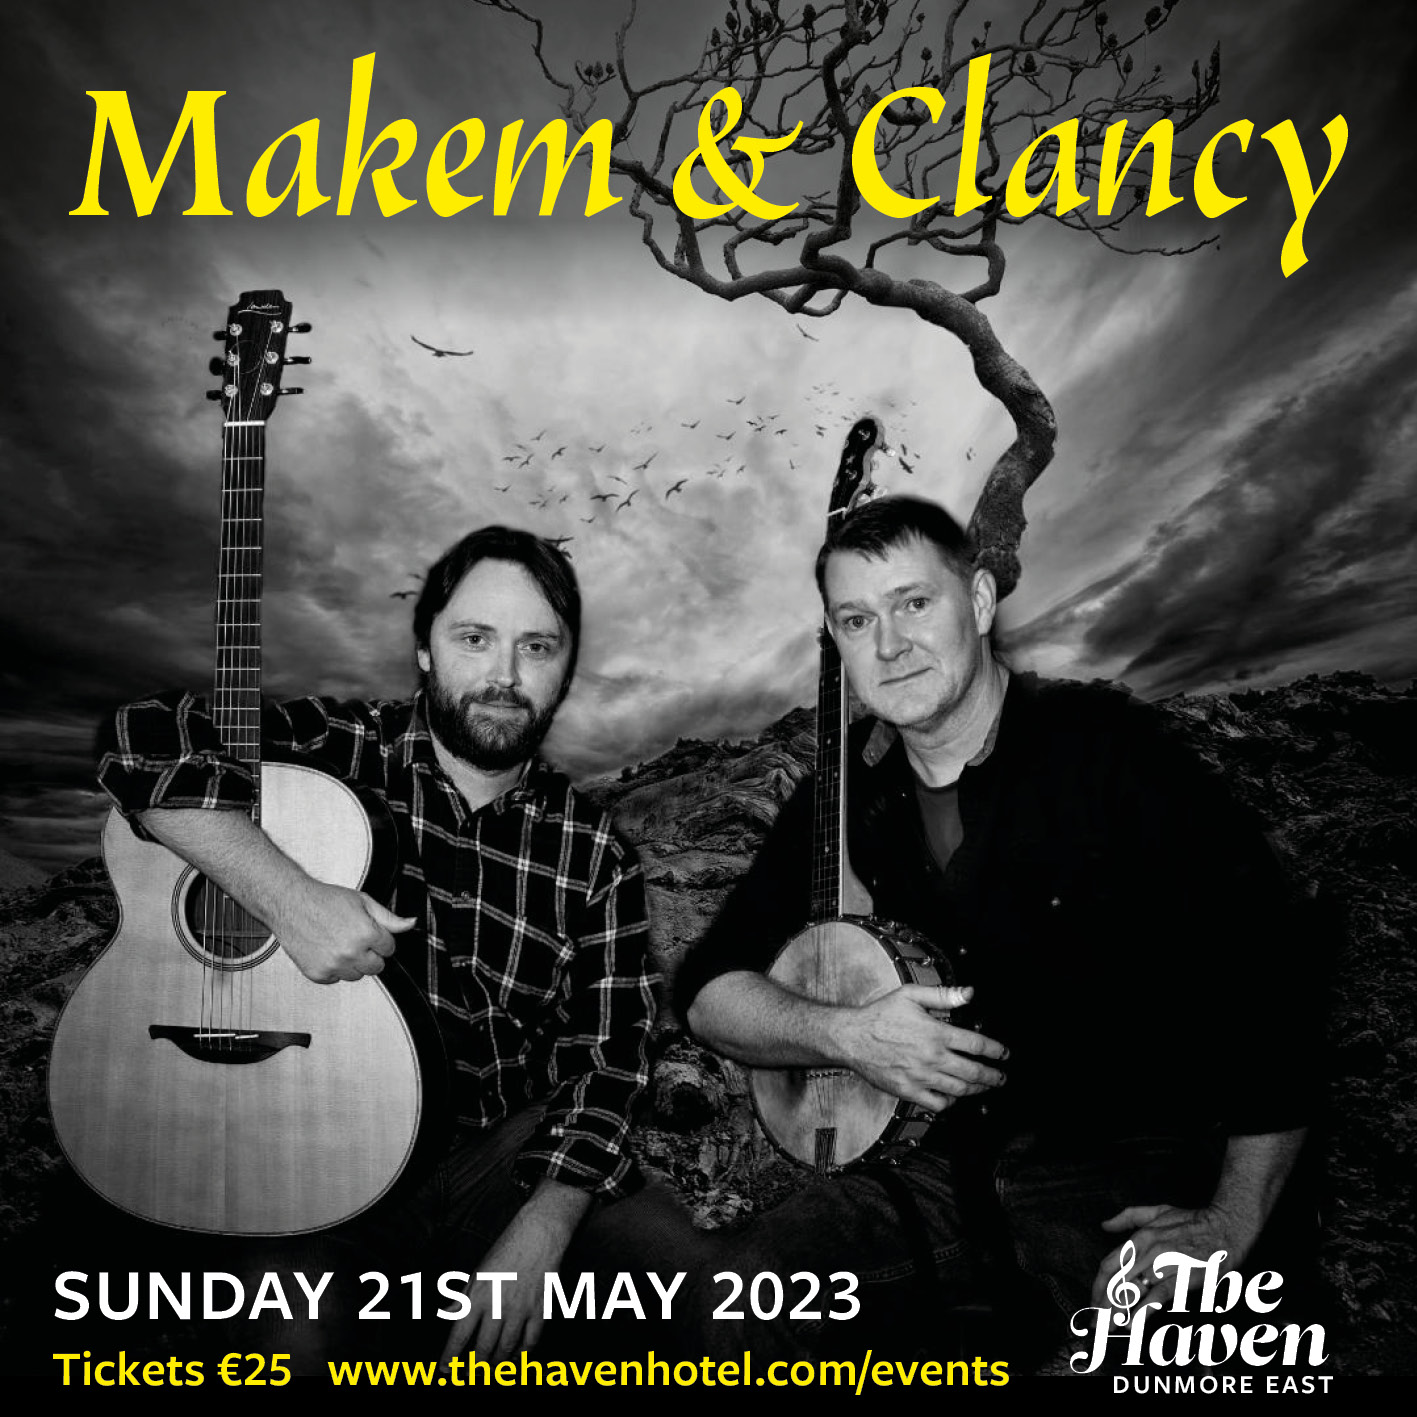 Makem & Clancy at The Haven Hotel, Dunmore East on Sunday 21st May 2023